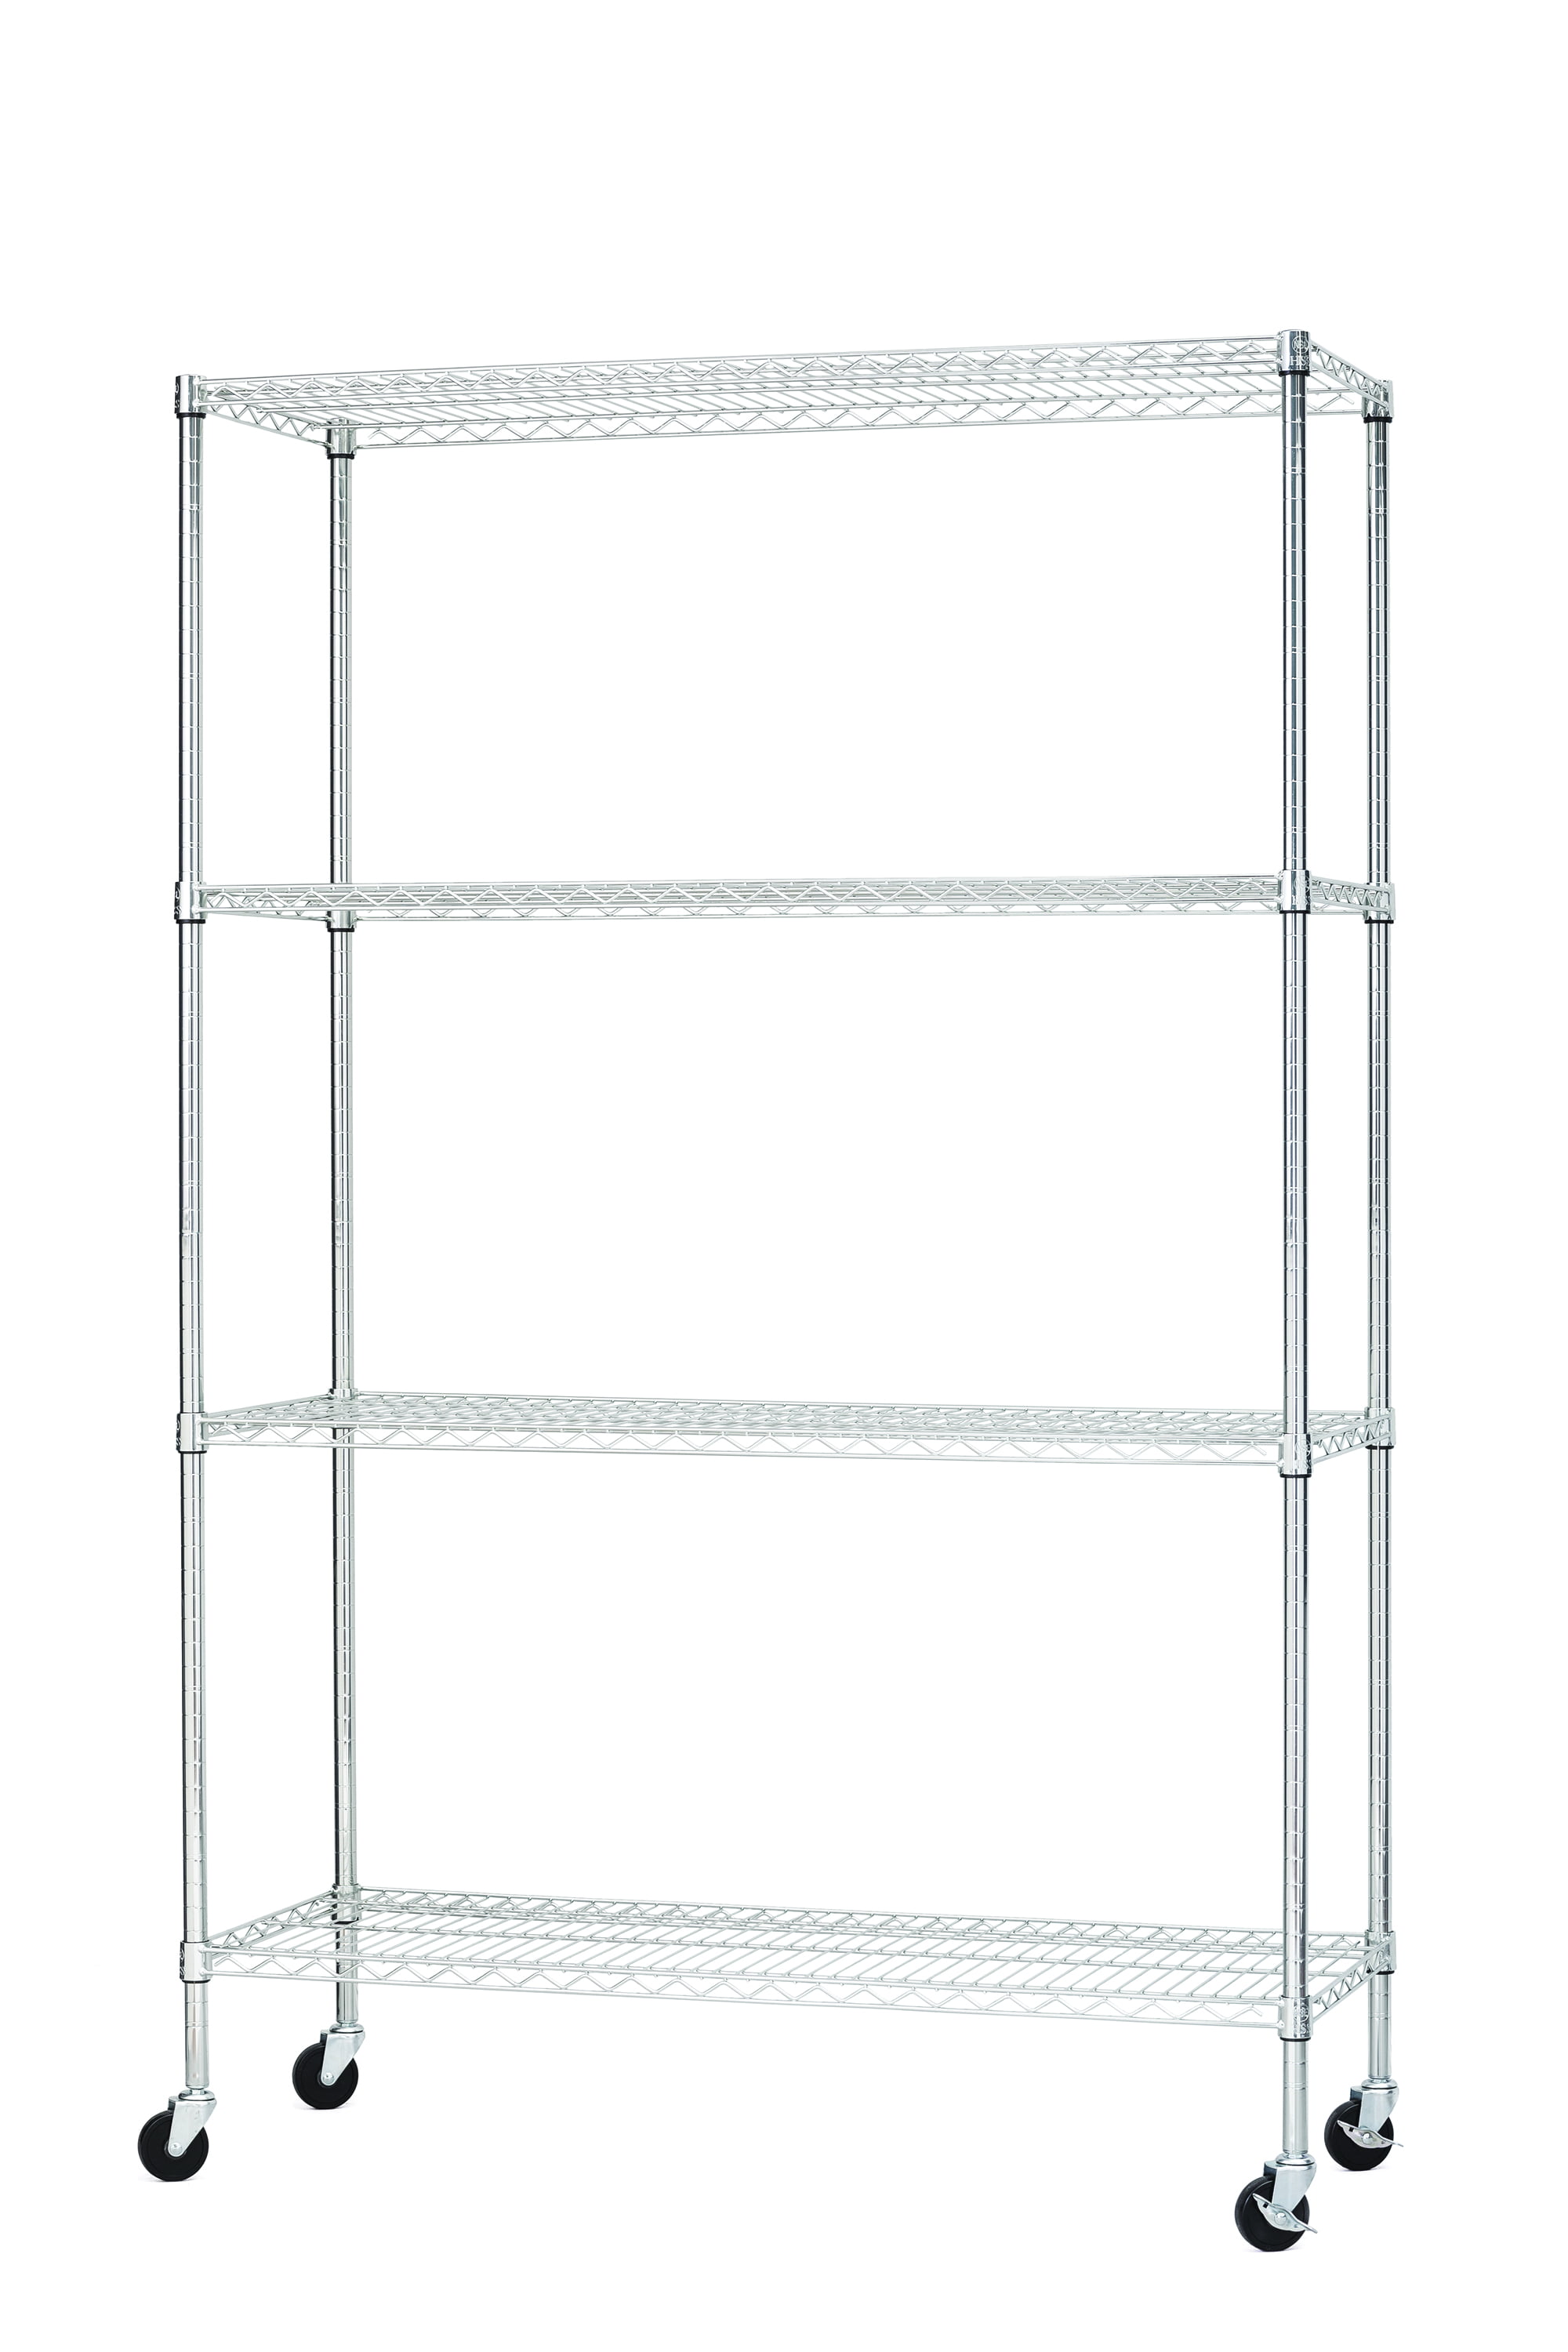 4-Pack NSF 8" Chrome Metal Wire Shelves Silver Post Stand for Shelving Unit 